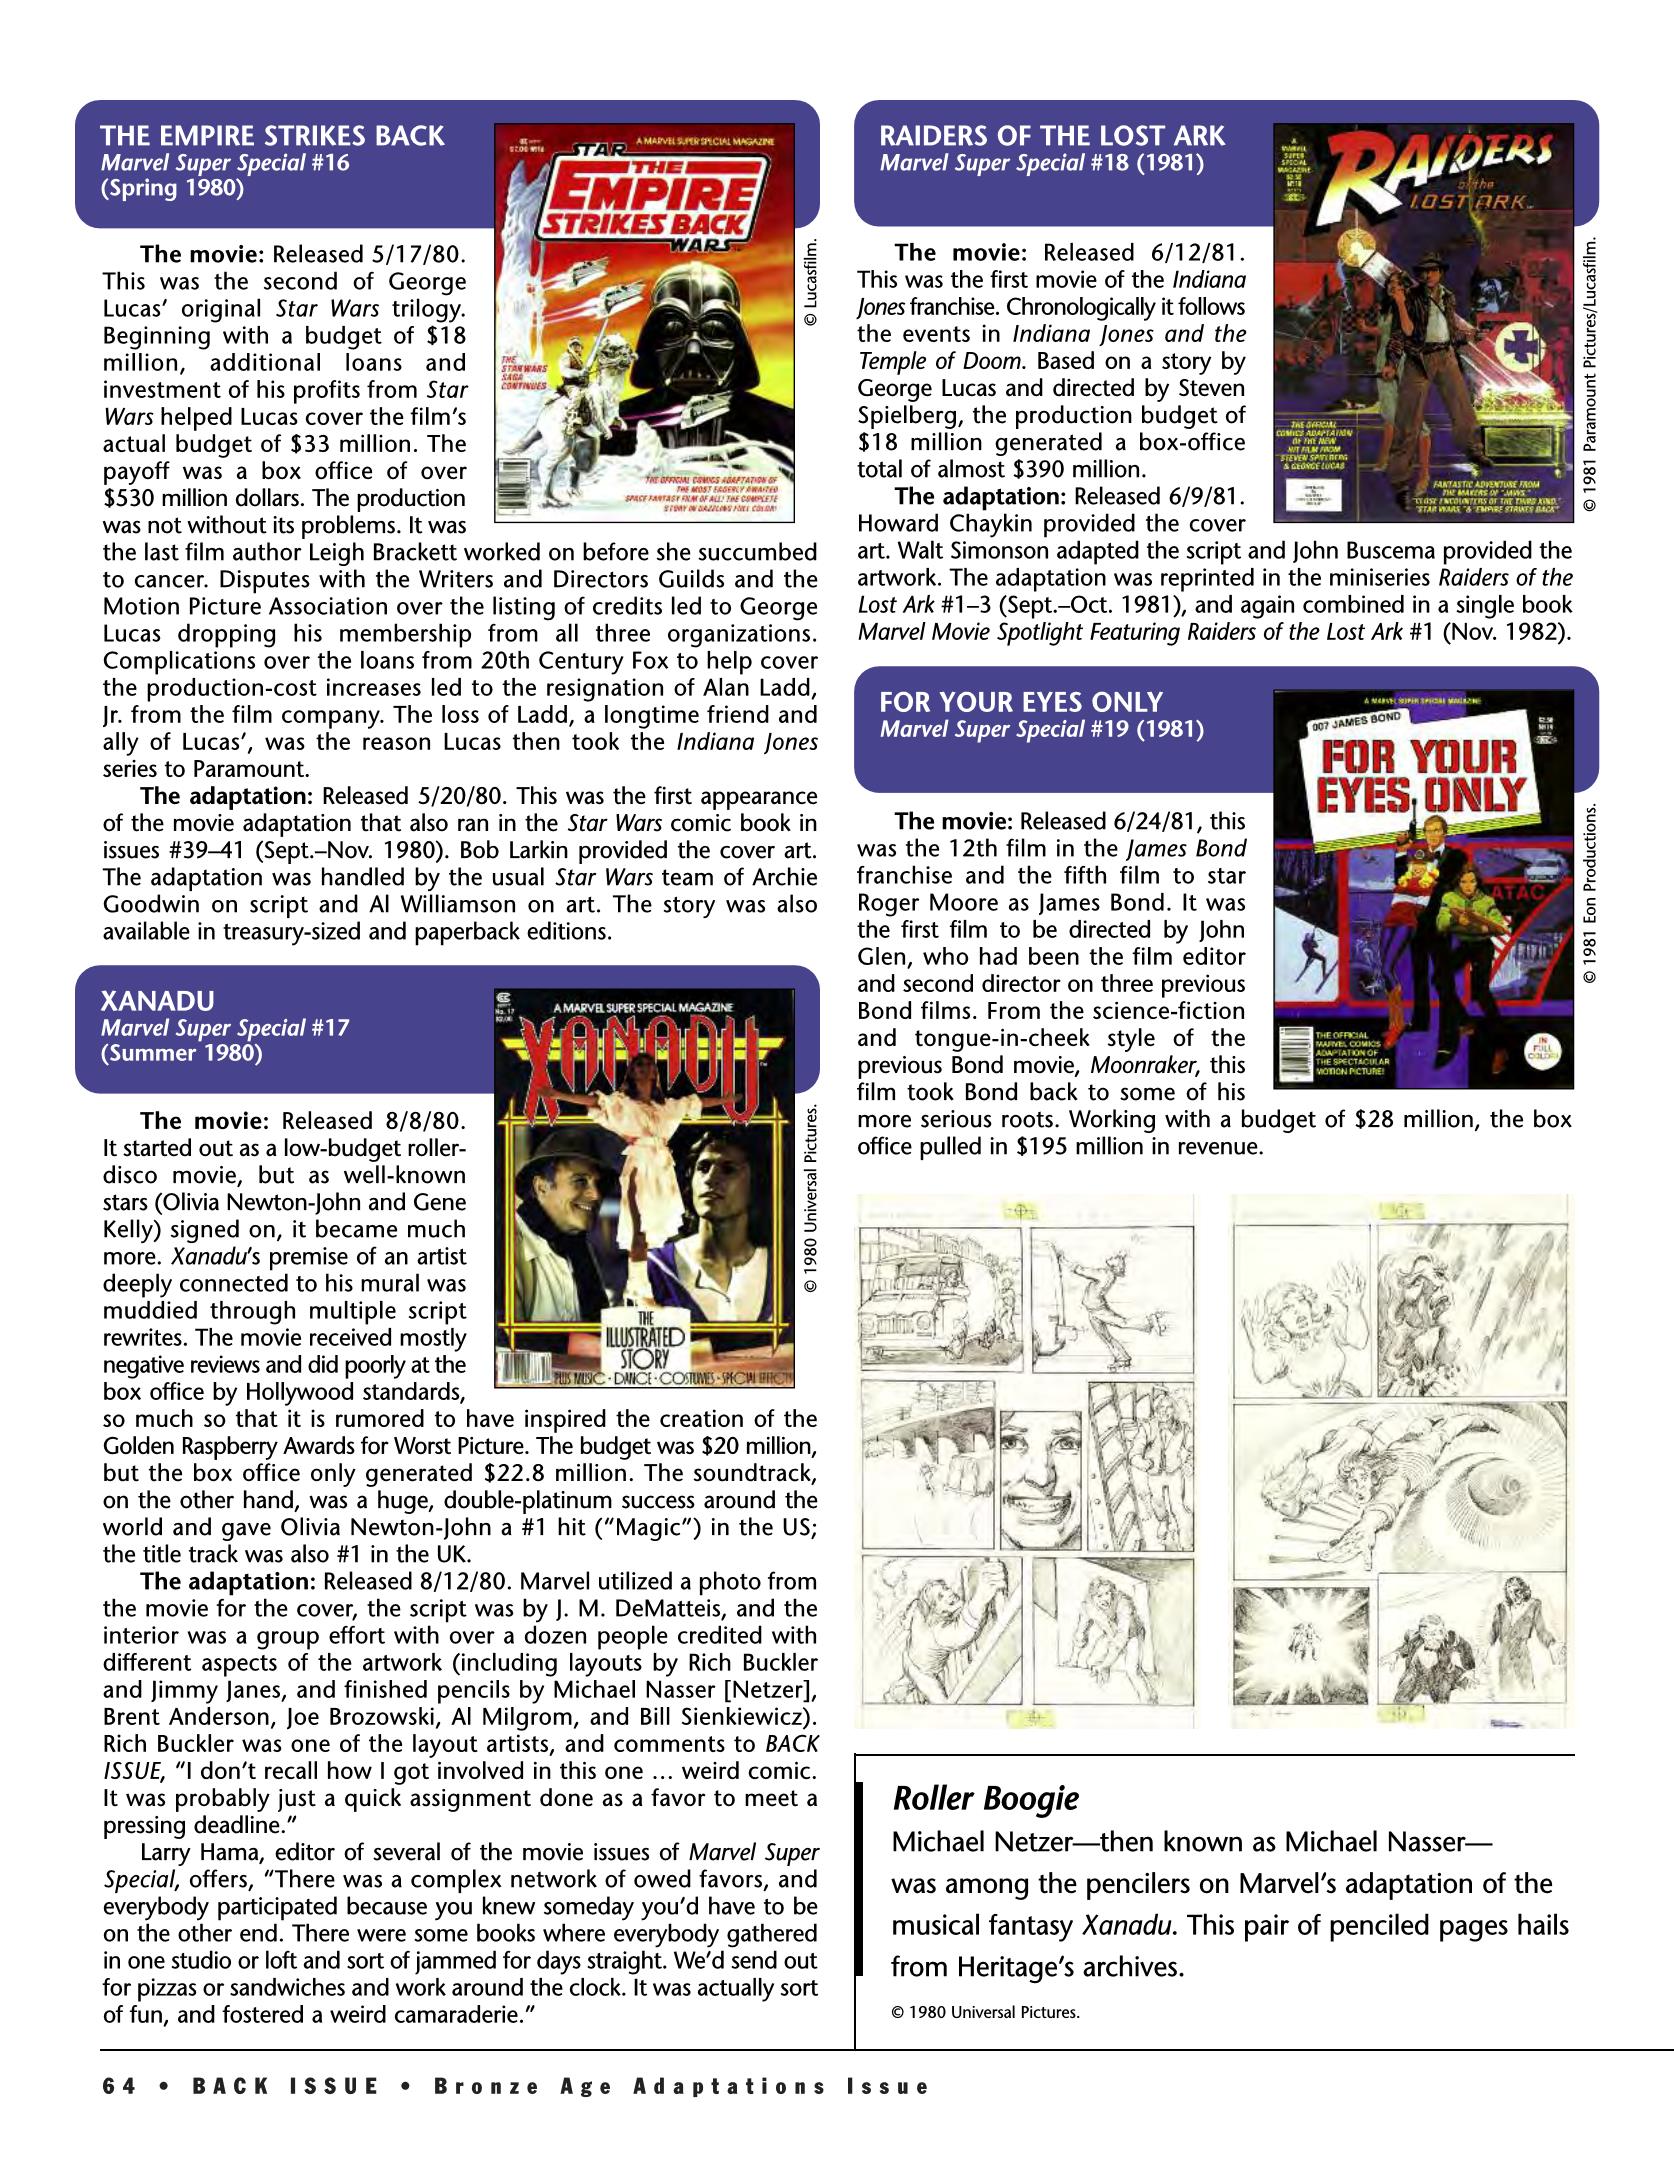 Read online Back Issue comic -  Issue #89 - 63